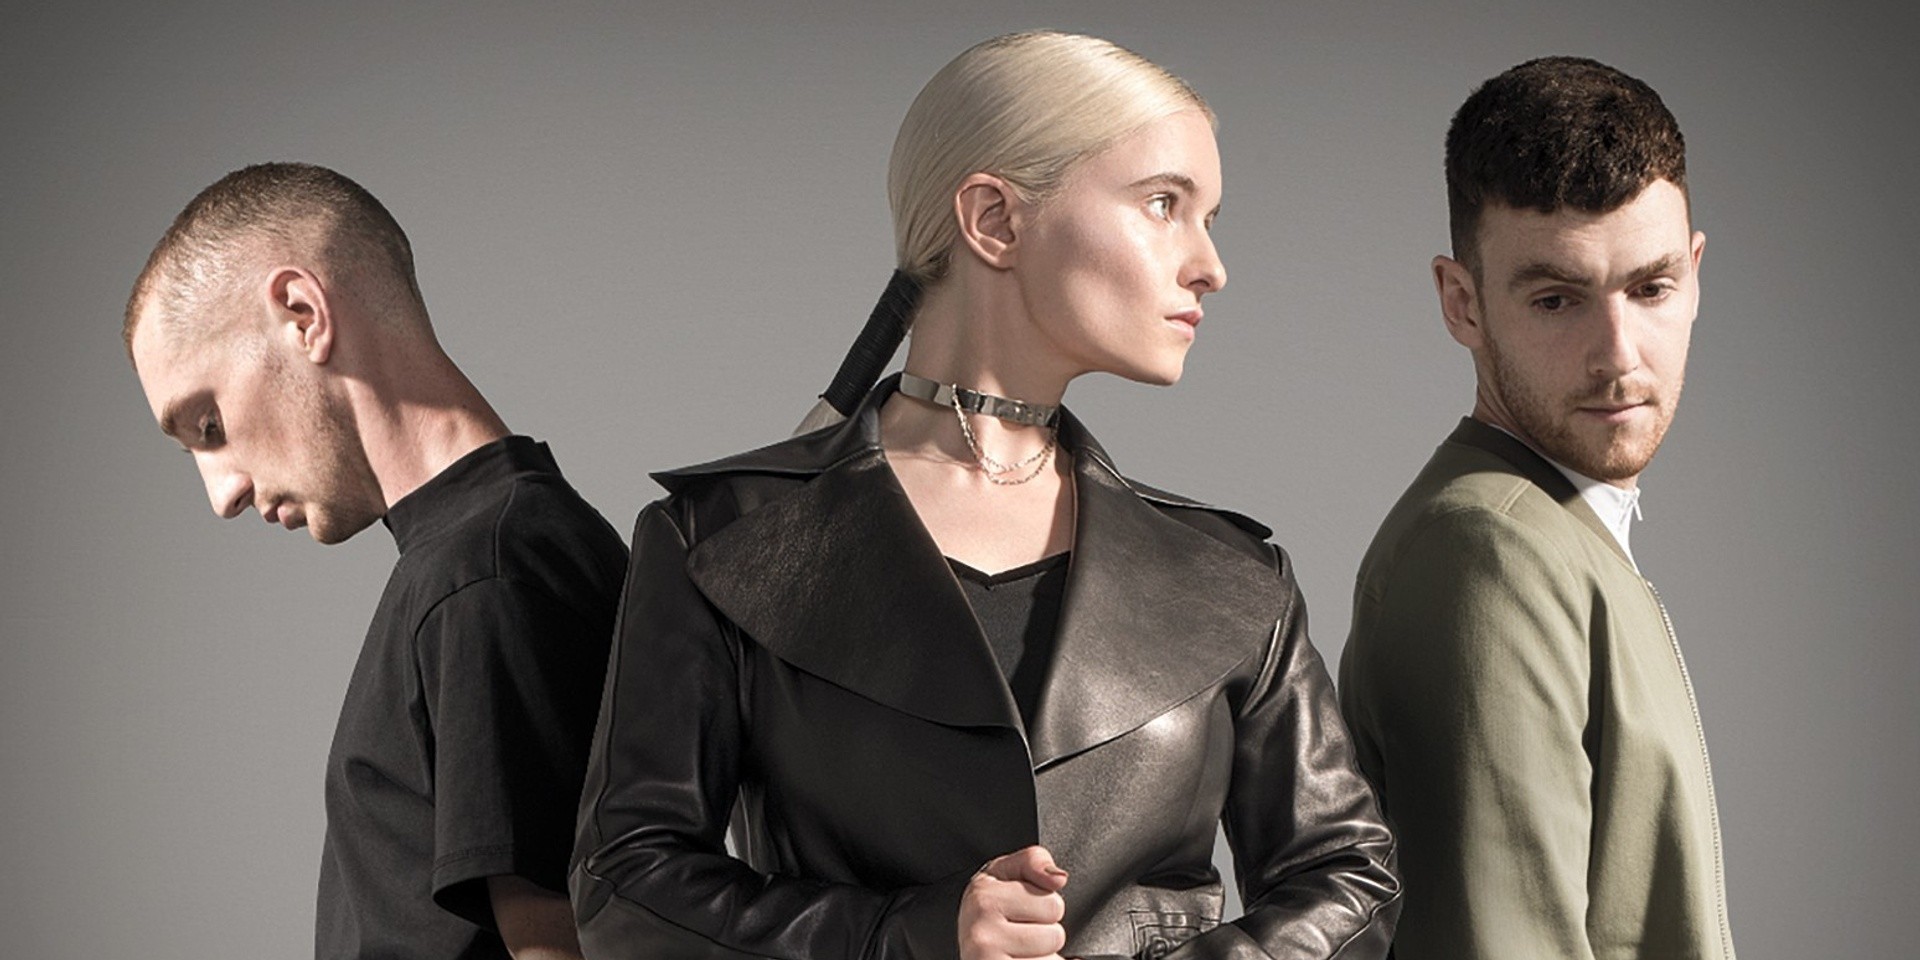 Clean Bandit's fusion of classical strings and future pop hooks have taken over the radio